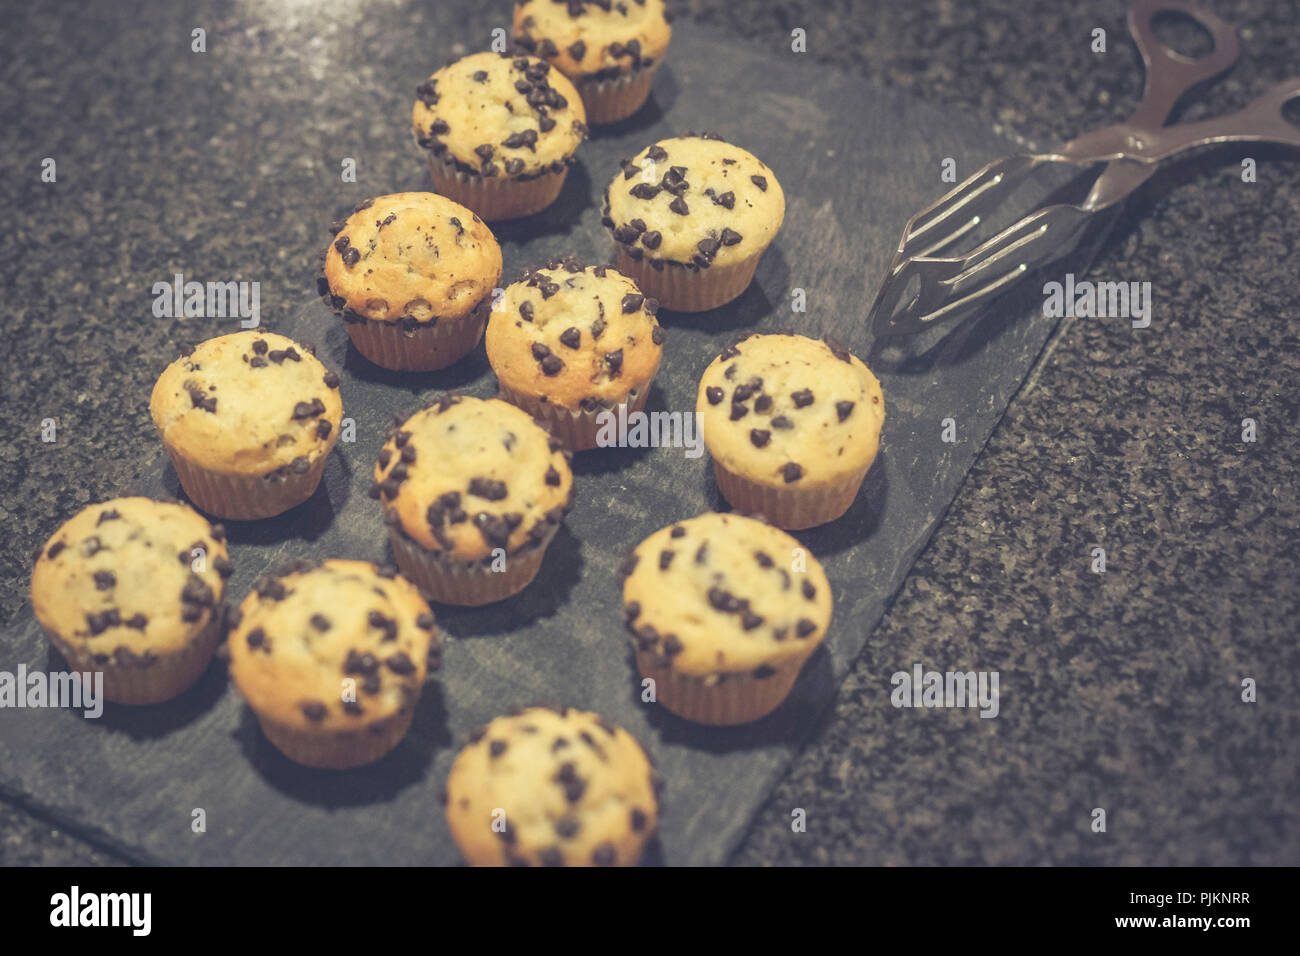 Small muffins with chocolate pieces ready to eat Stock Photo